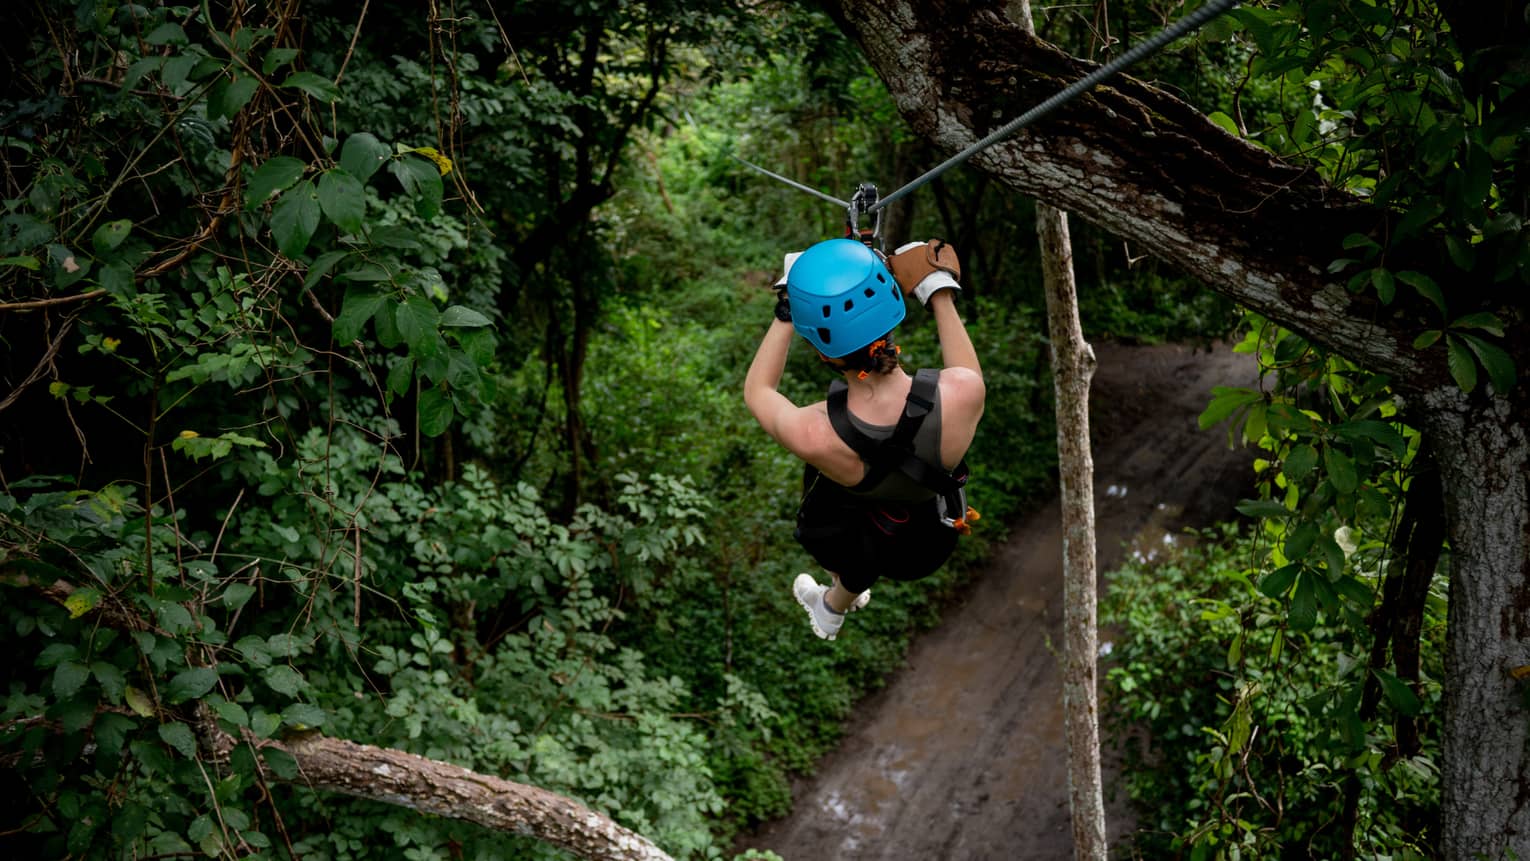 Aerial view of a person wearing a black sleevless shirt, black shorts, white sneakers and a bright blue helmet sliding through the trees on a zipline